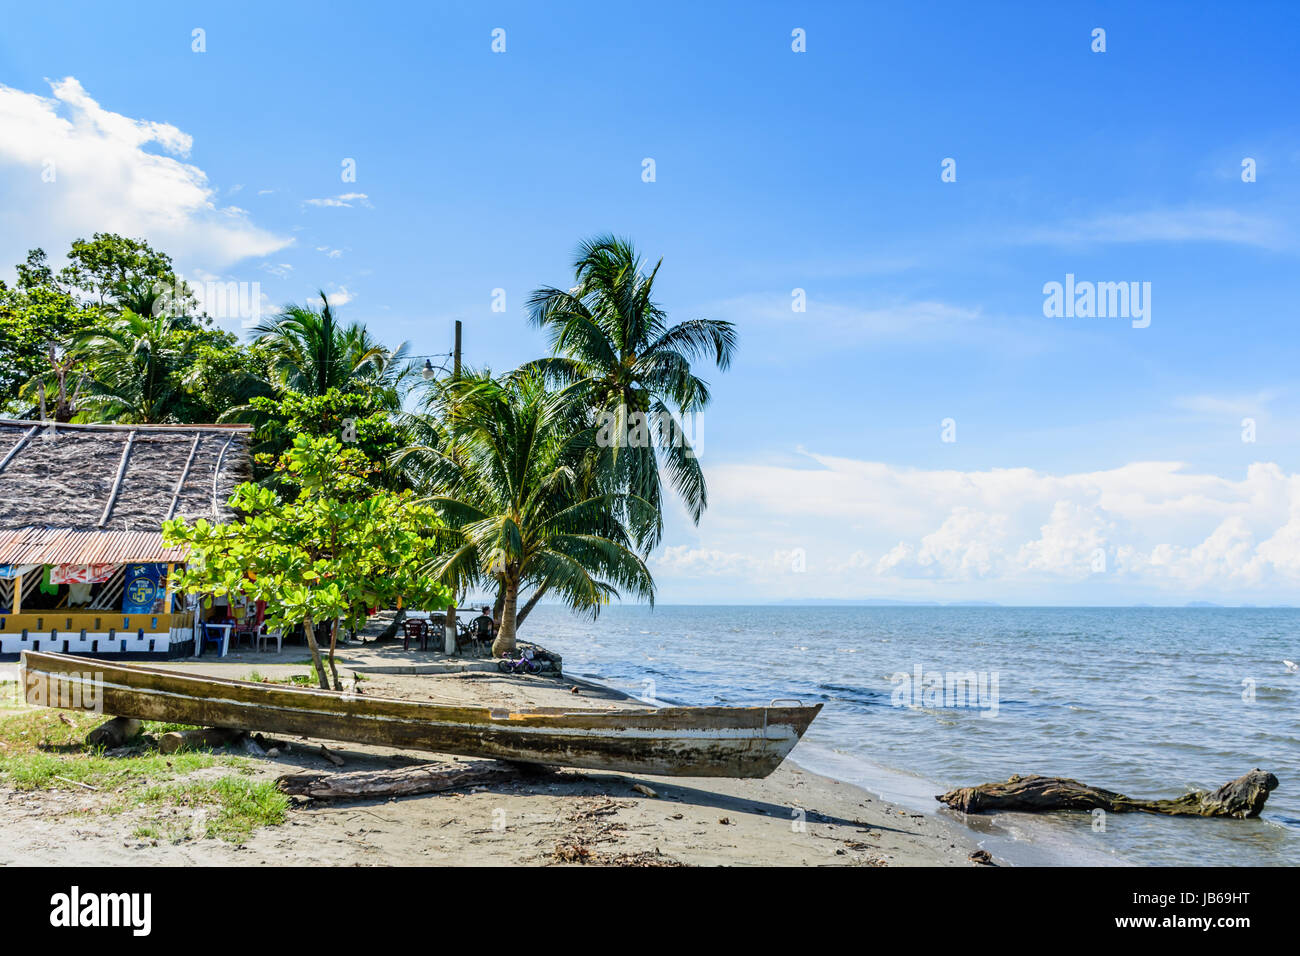 Livingston, Guatemala - August 31, 2016: Boat pulled ashore on beach in Caribbean town of Livingston Stock Photo